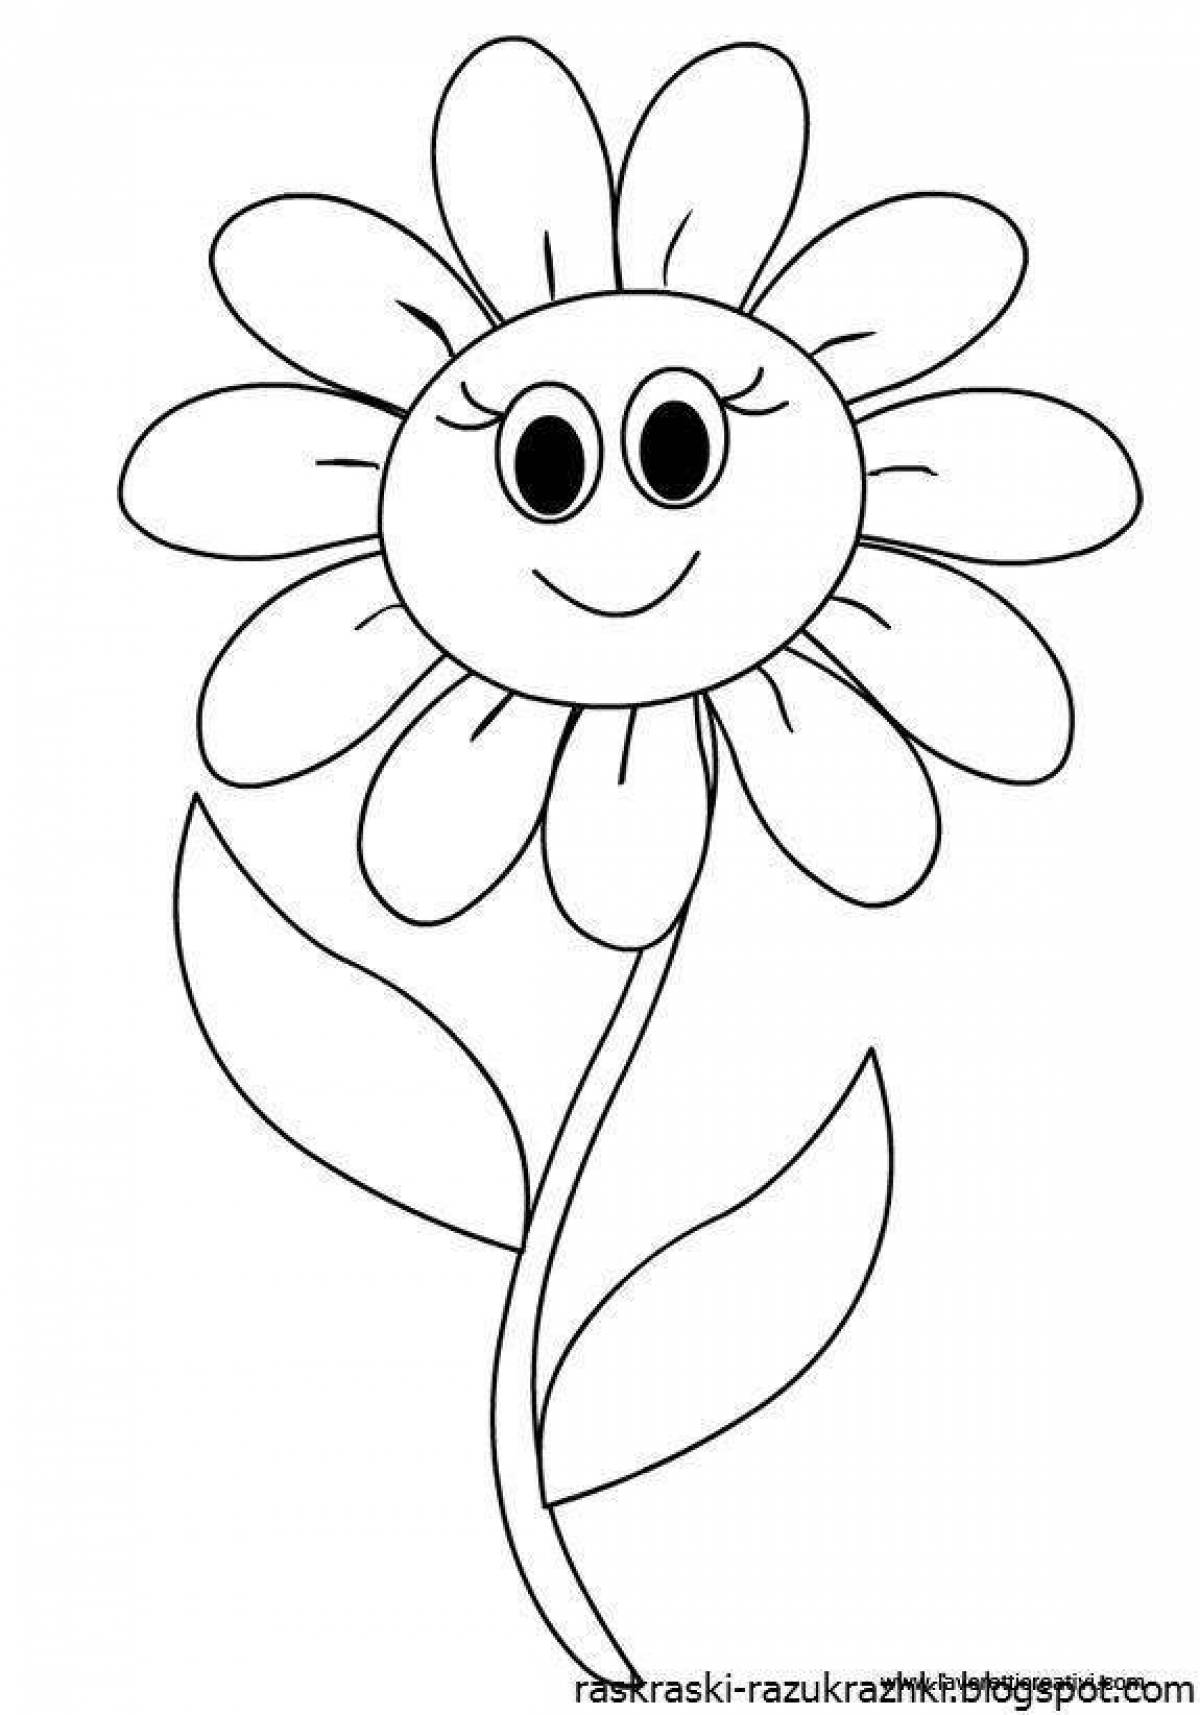 Incredible coloring flower picture for kids